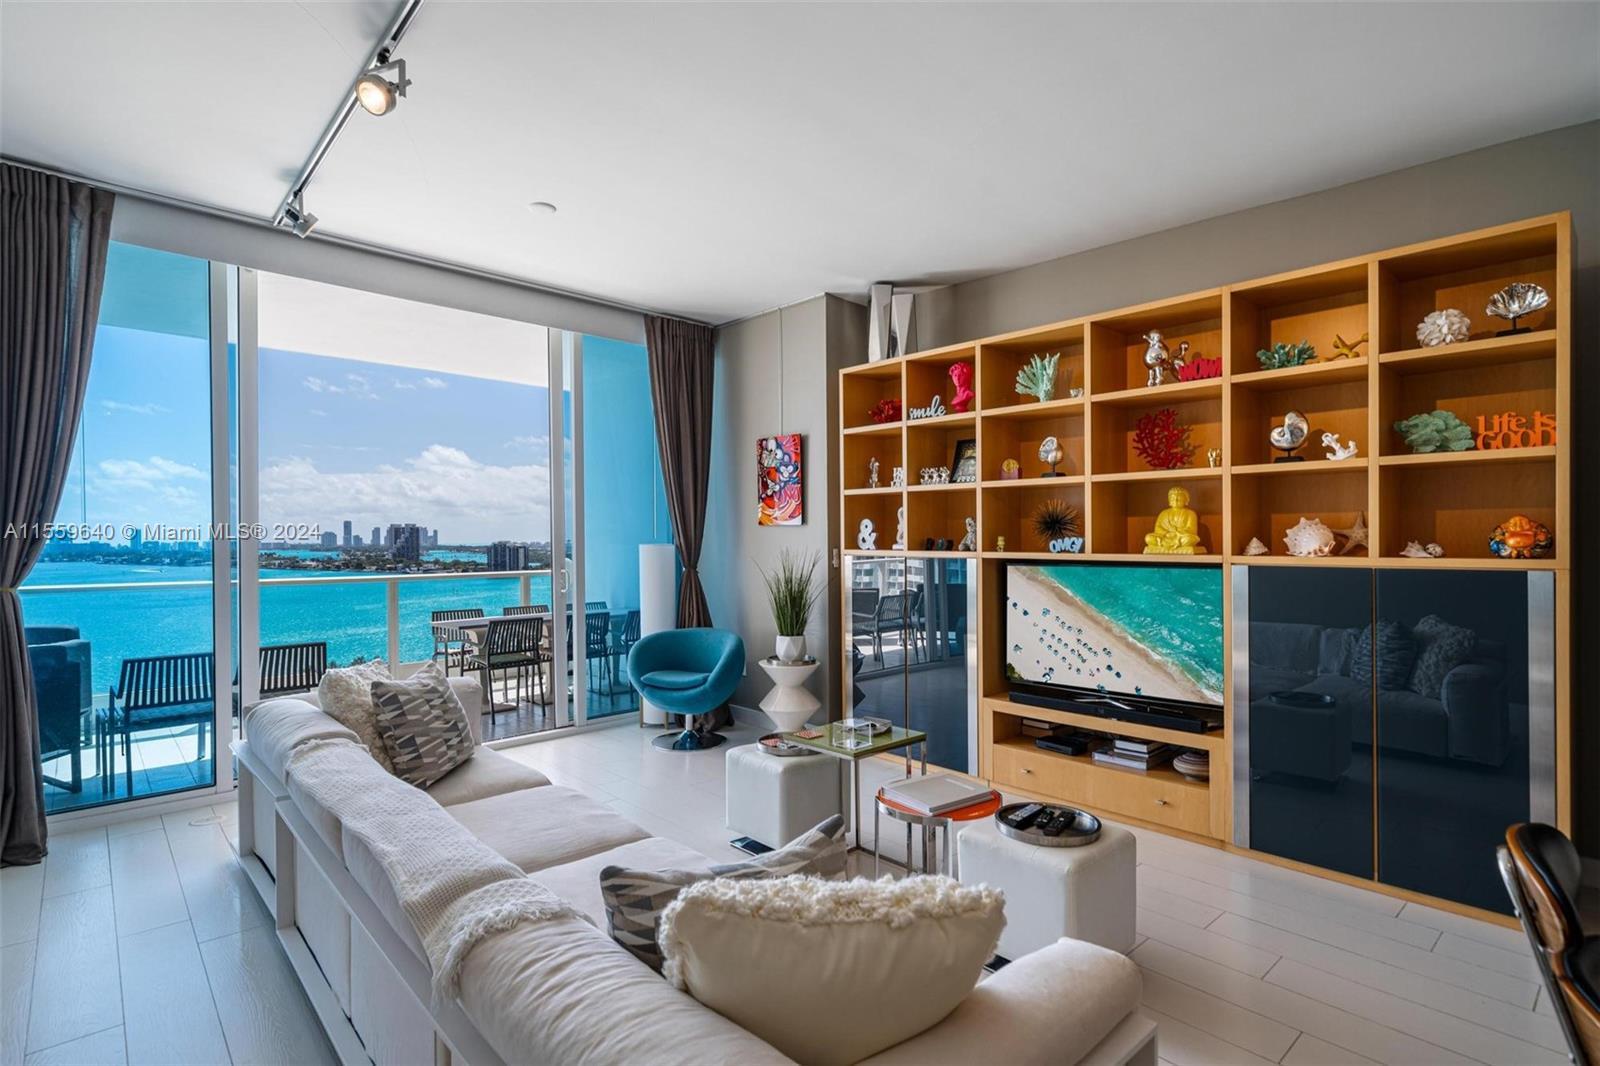 Make this billion-dollar Waterview yours! Designer 2 bedrooms, two full baths, 10-foot ceilings, ope